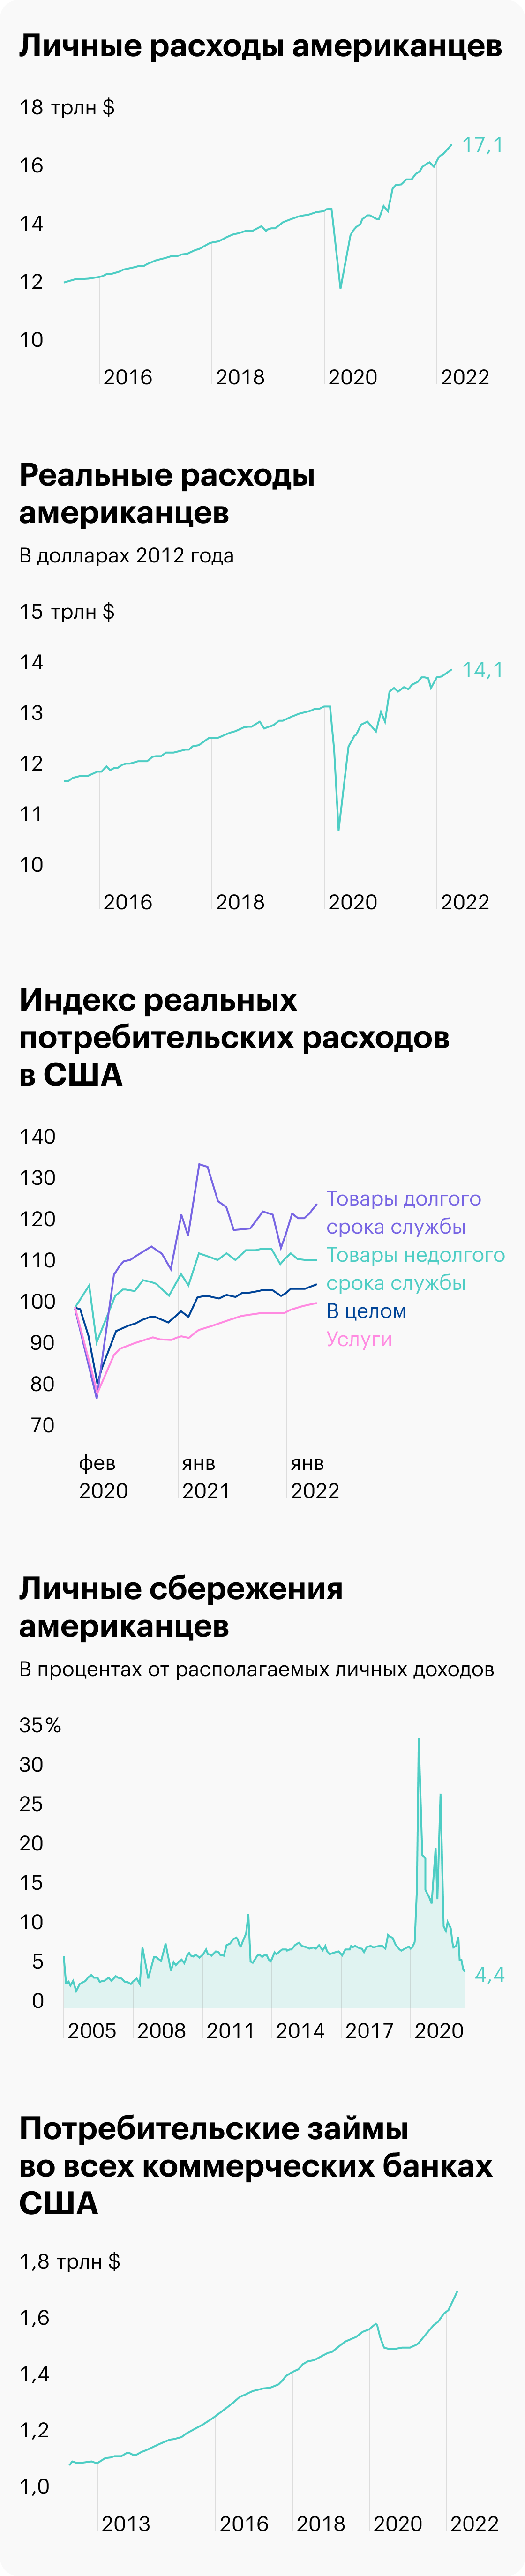 Источник: Daily Shot, Consumer spending, Spending on services, Consumers dipped into their savings, ФРС США